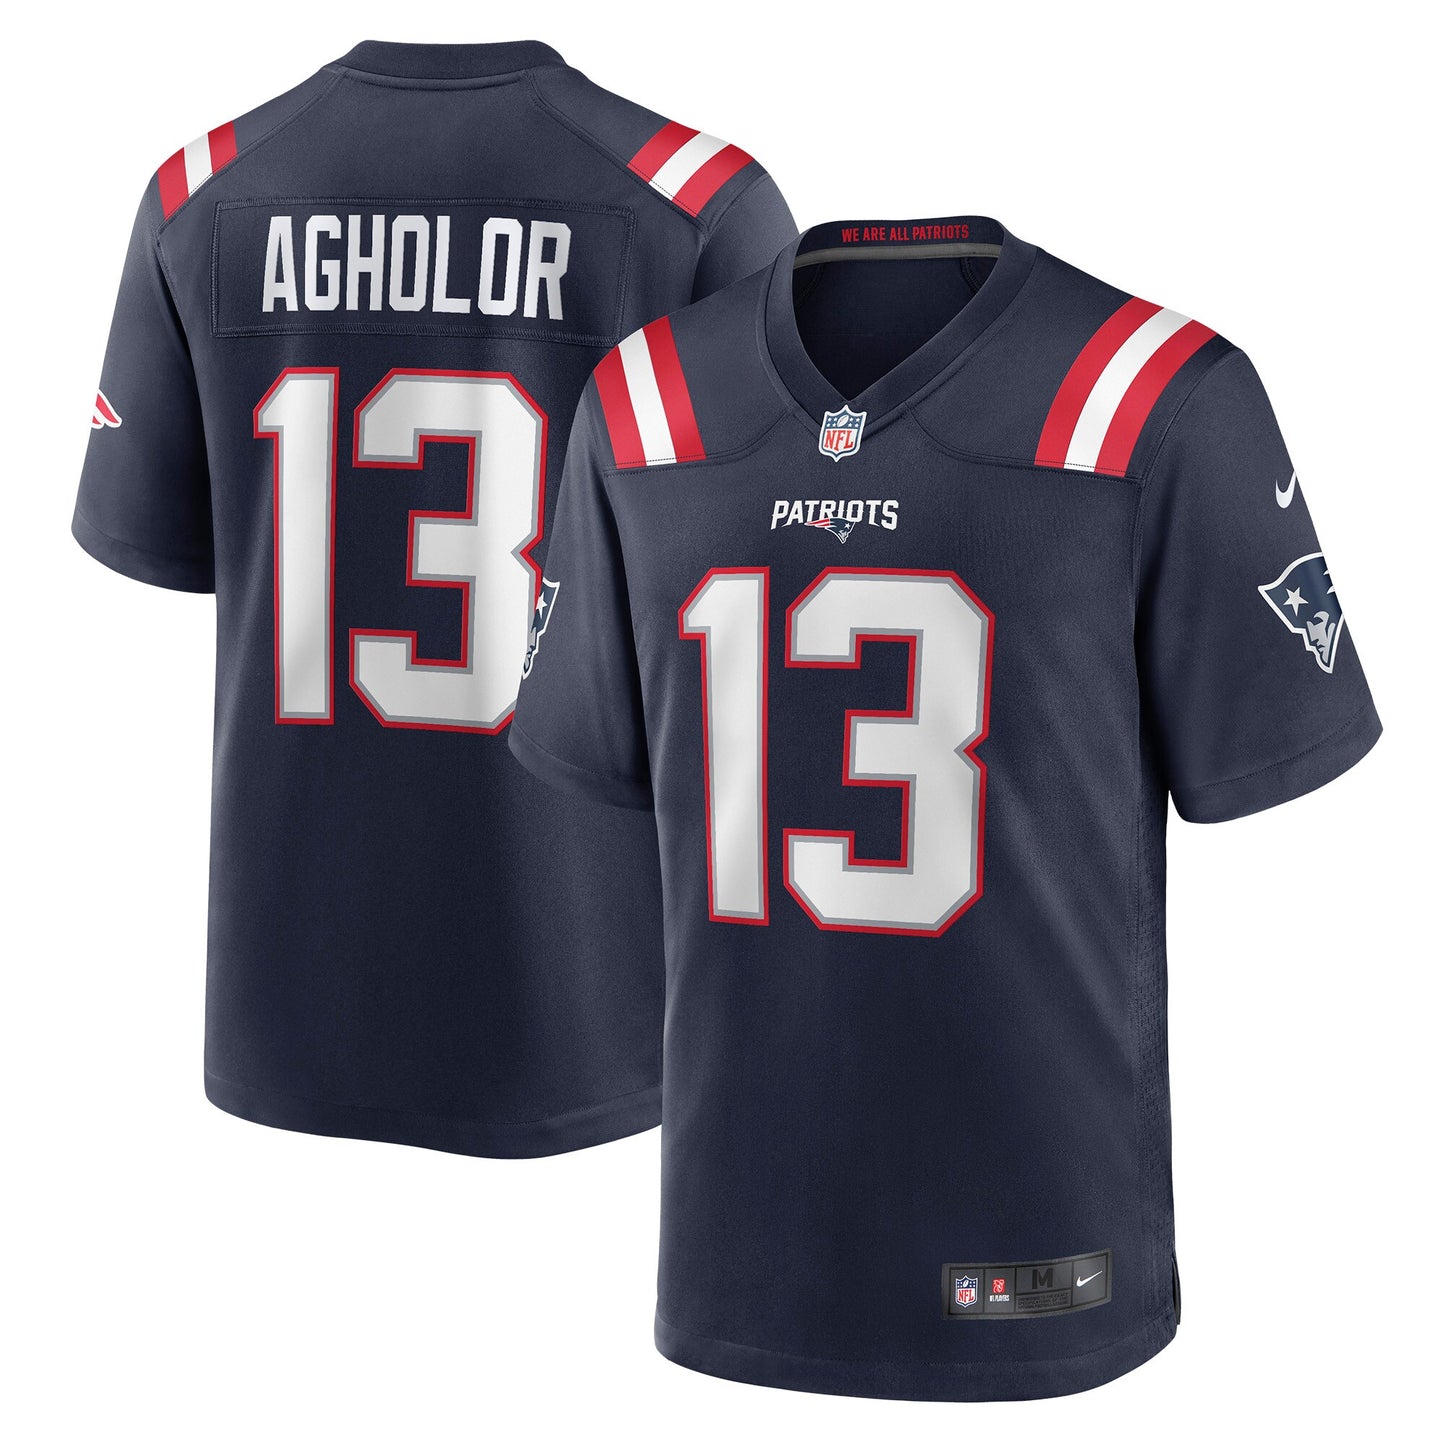 Nelson Agholor New England Patriots Nike Game Jersey - Navy